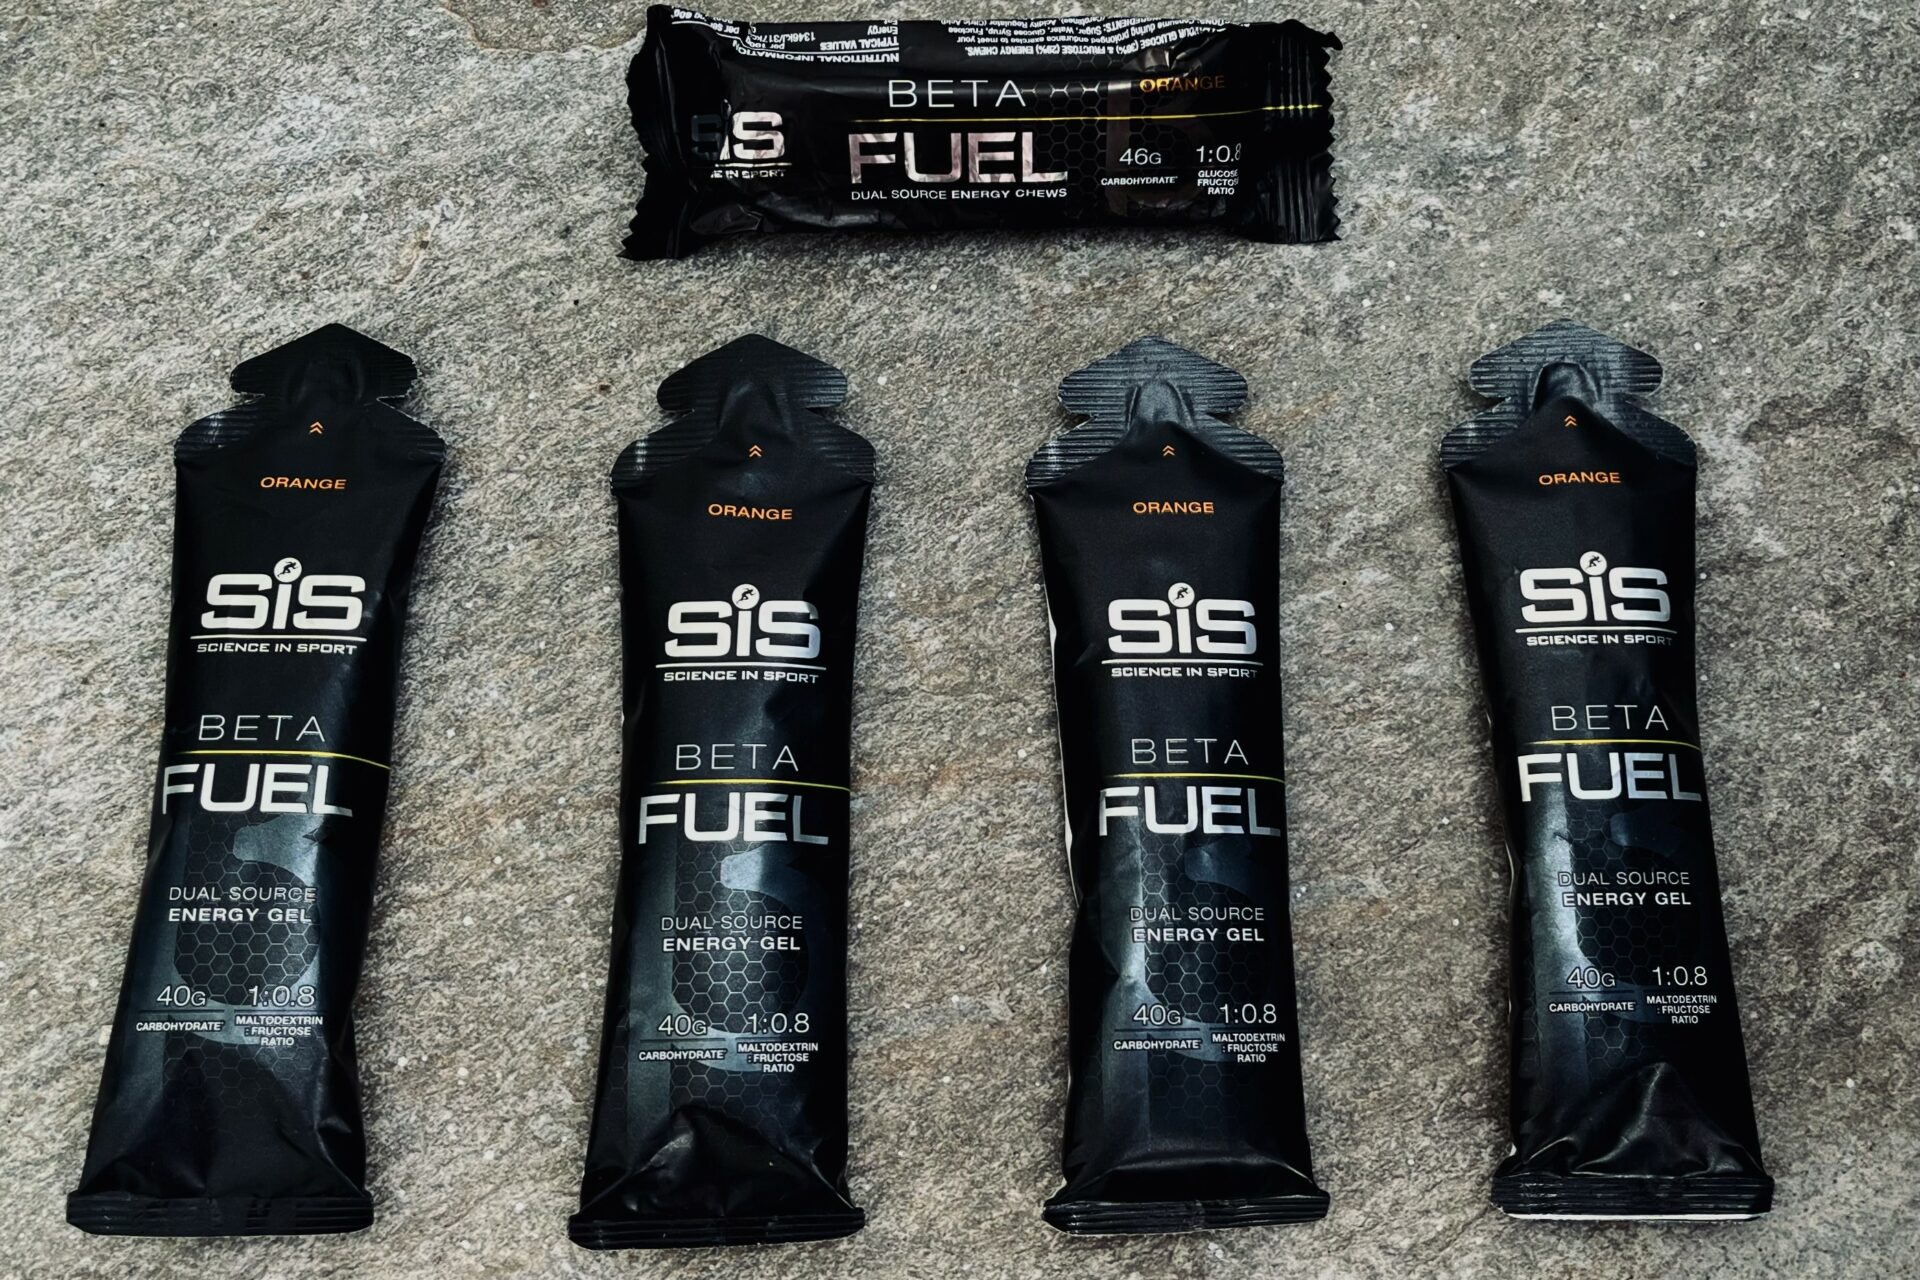 On a grey floor science in sport beta fuel gels are laying ready to be consumed during a bike ride.